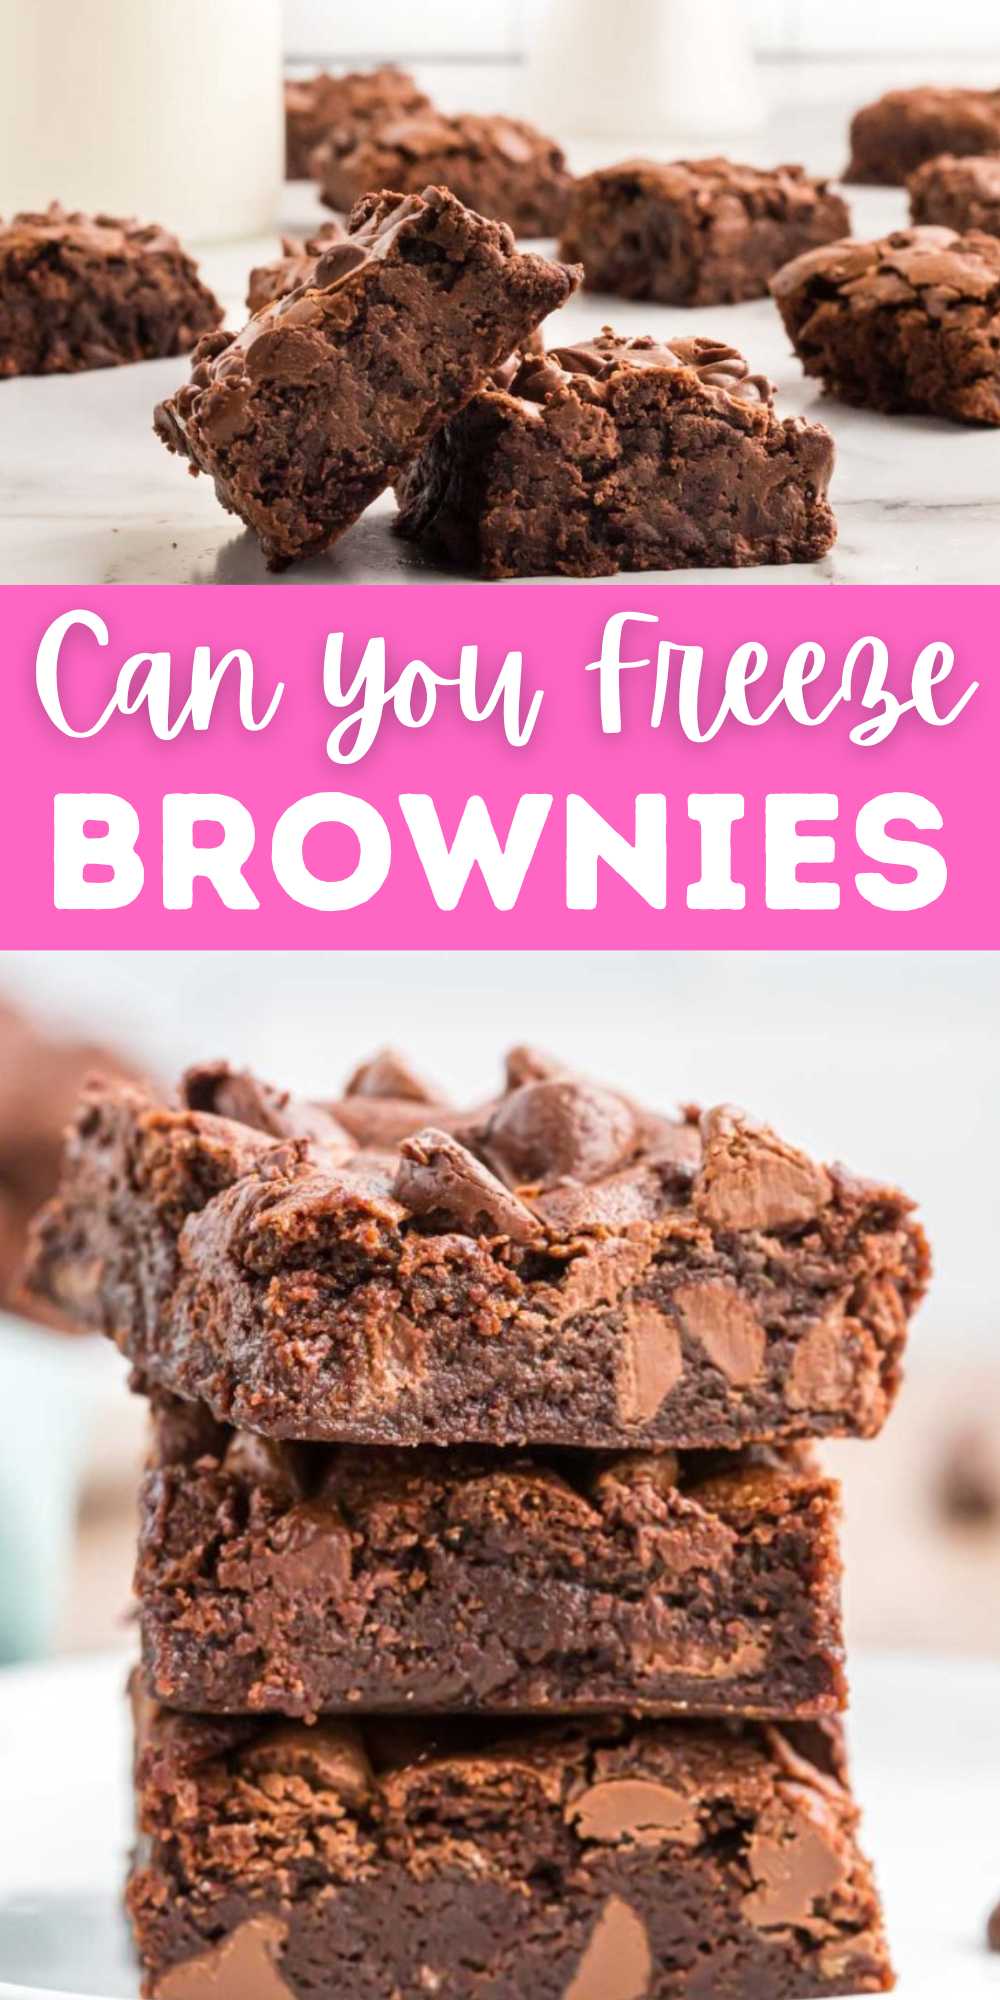 Many people find great pleasure in eating warm, gooey brownies straight from the oven, If you come up with to many "Can you freeze brownies?" Thankfully, brownies can be frozen and is an easy and effective technique. To keep their delicious flavor and texture intact until you're ready to enjoy them. #eatingonadime #canyourfreezebrownies #frozenbrownietips